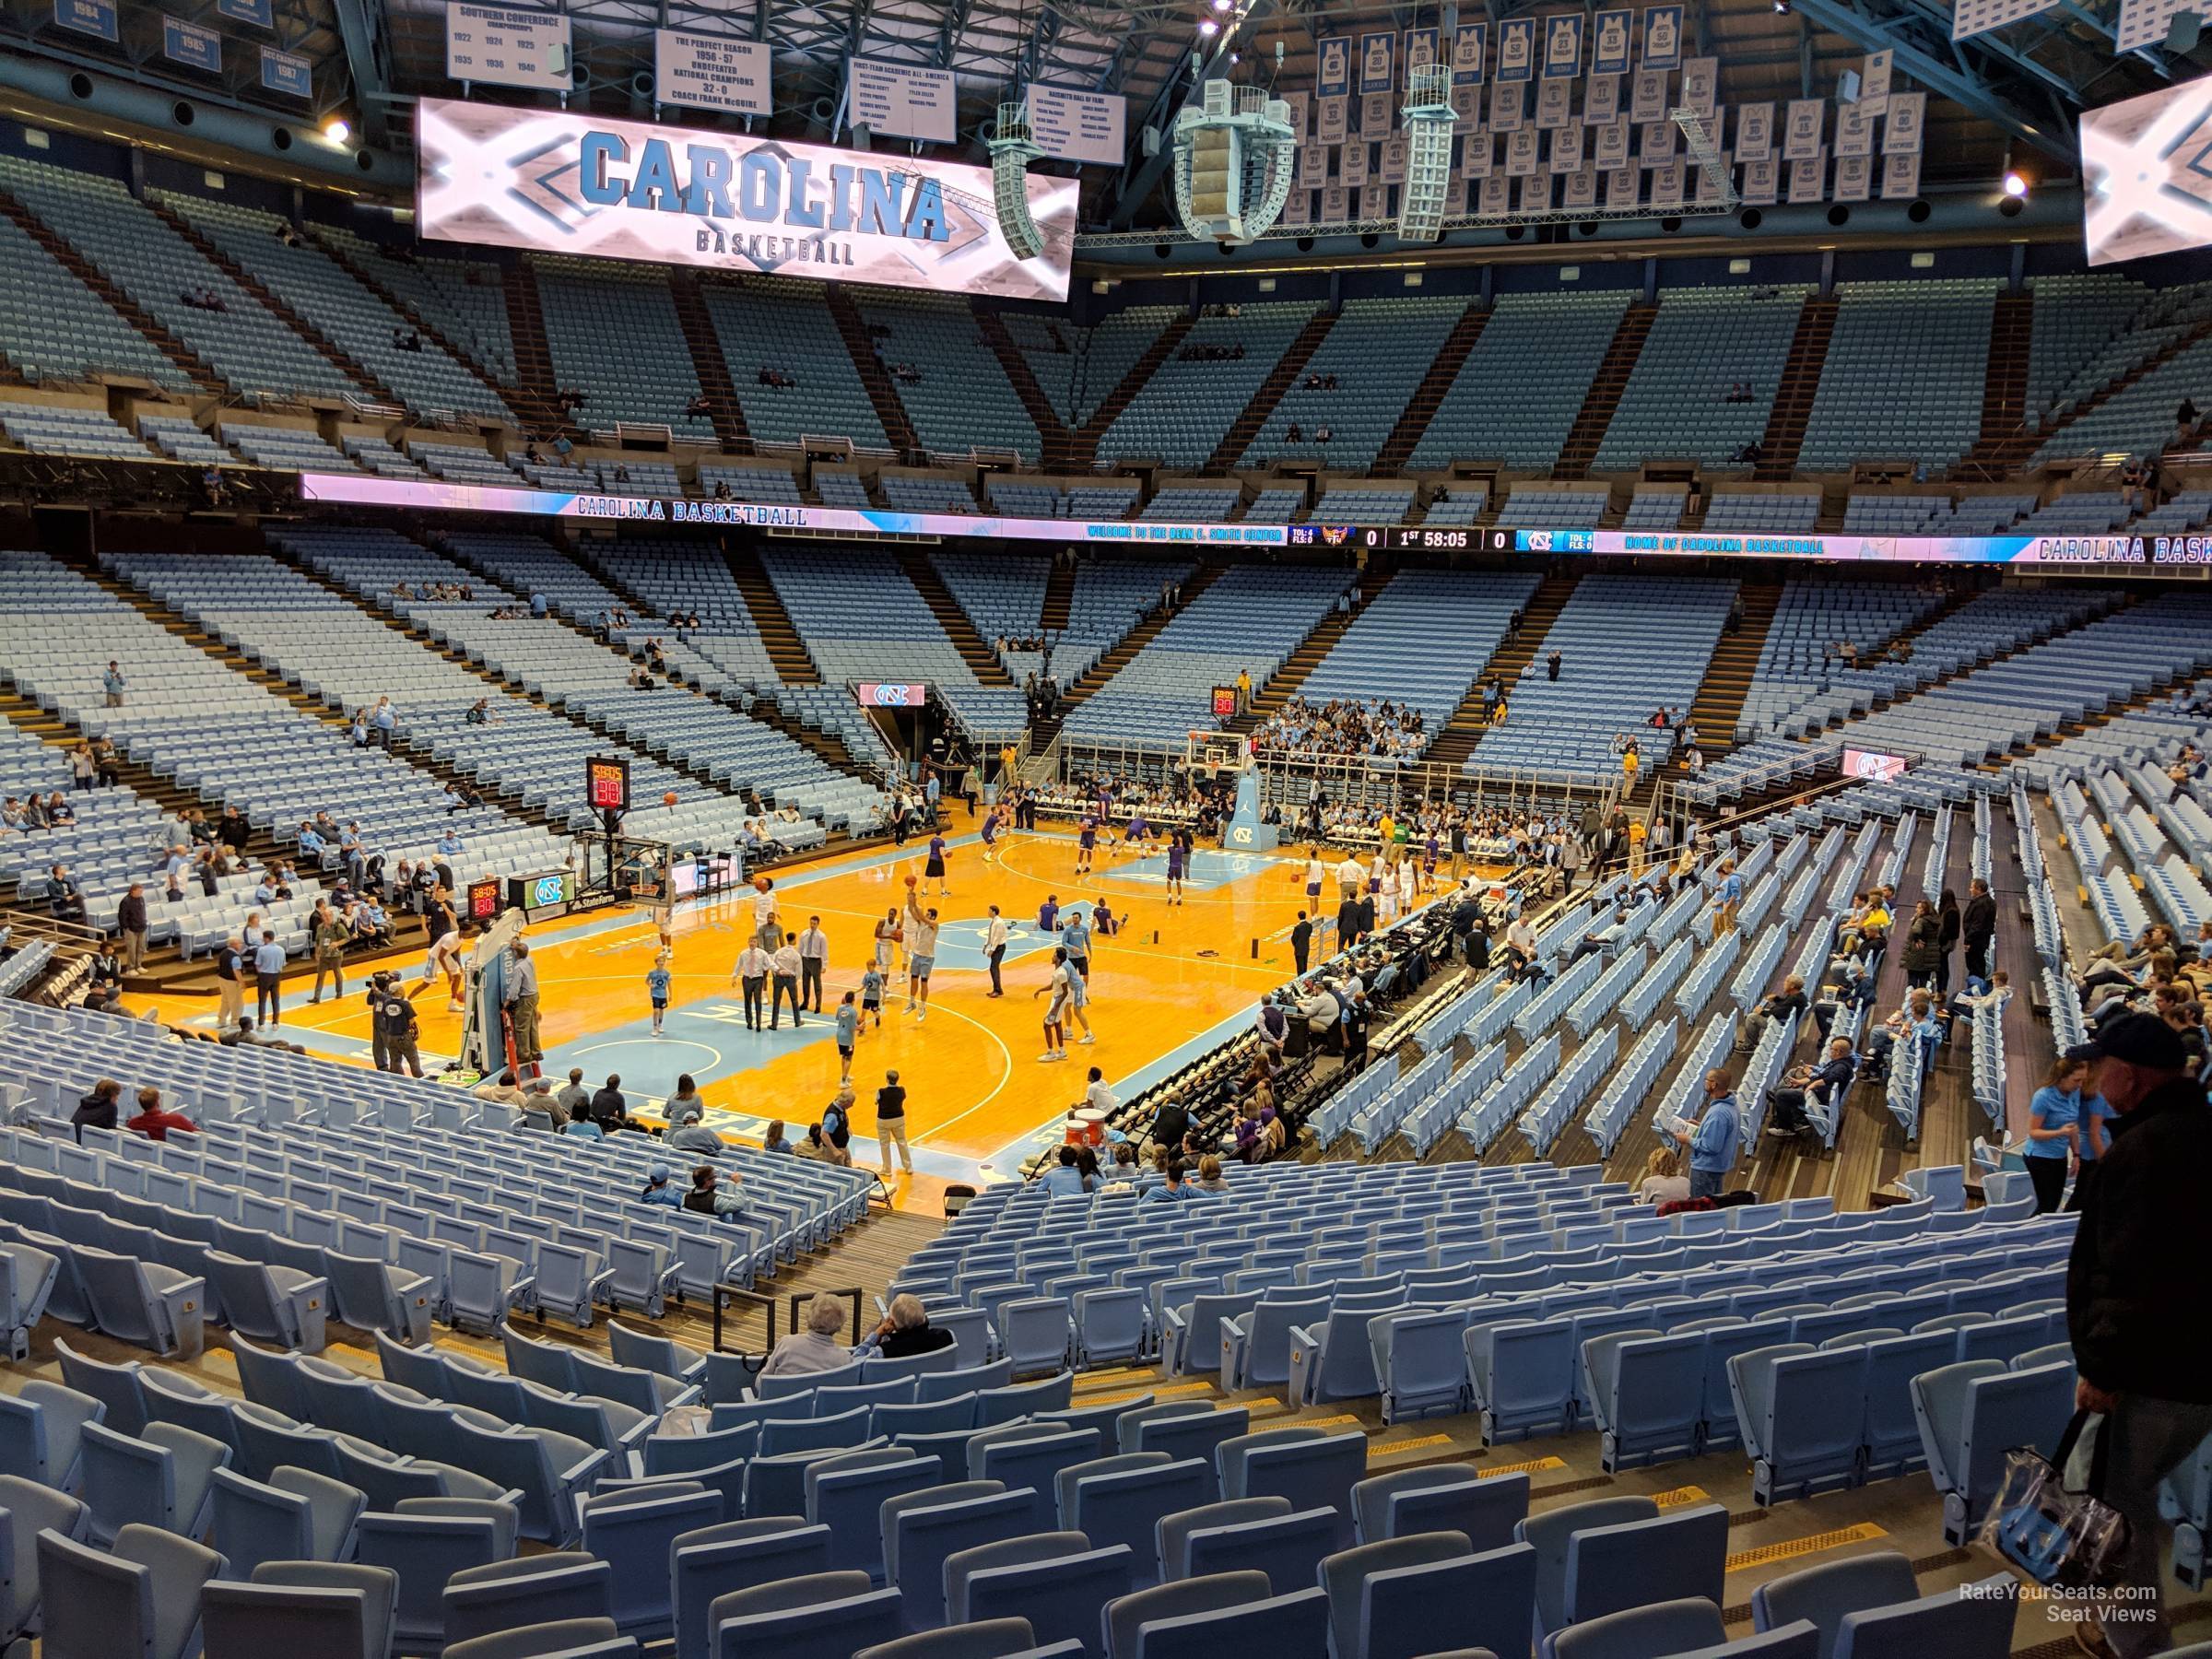 section 103, row z seat view  - dean smith center